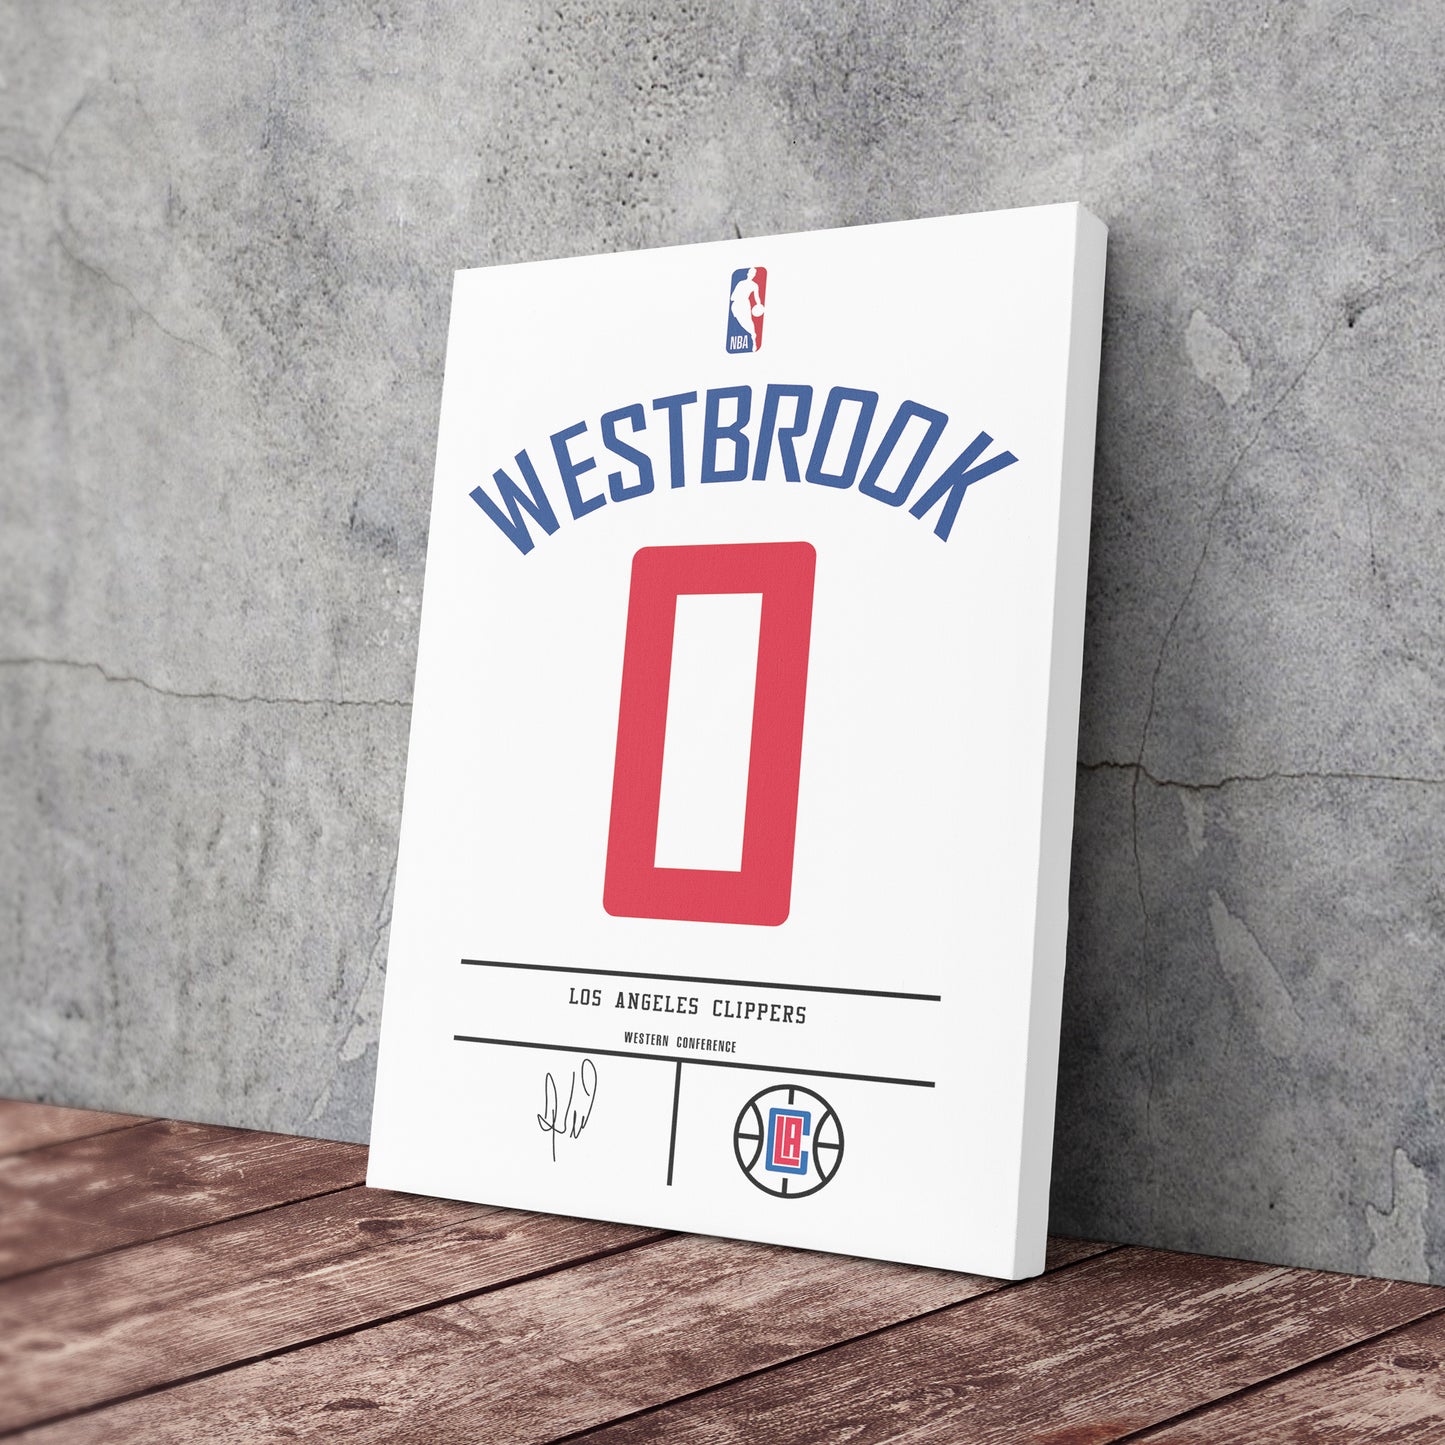 Russell Westbrook Clippers Jersey Art